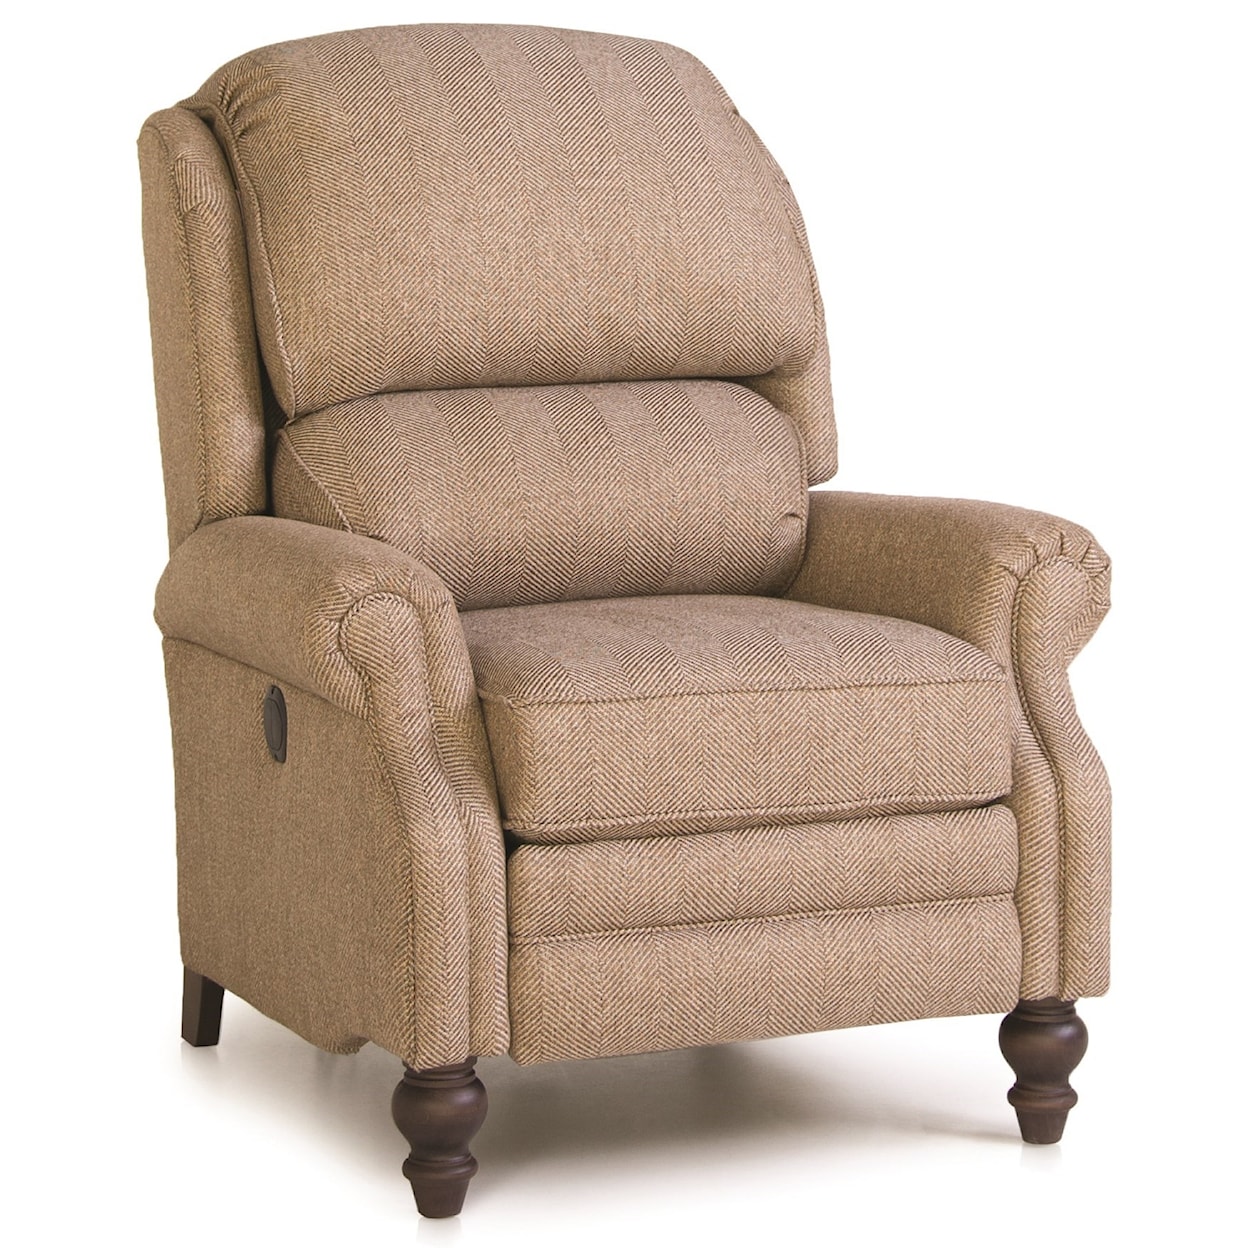 Smith Brothers 705L Pressback Reclining Chair